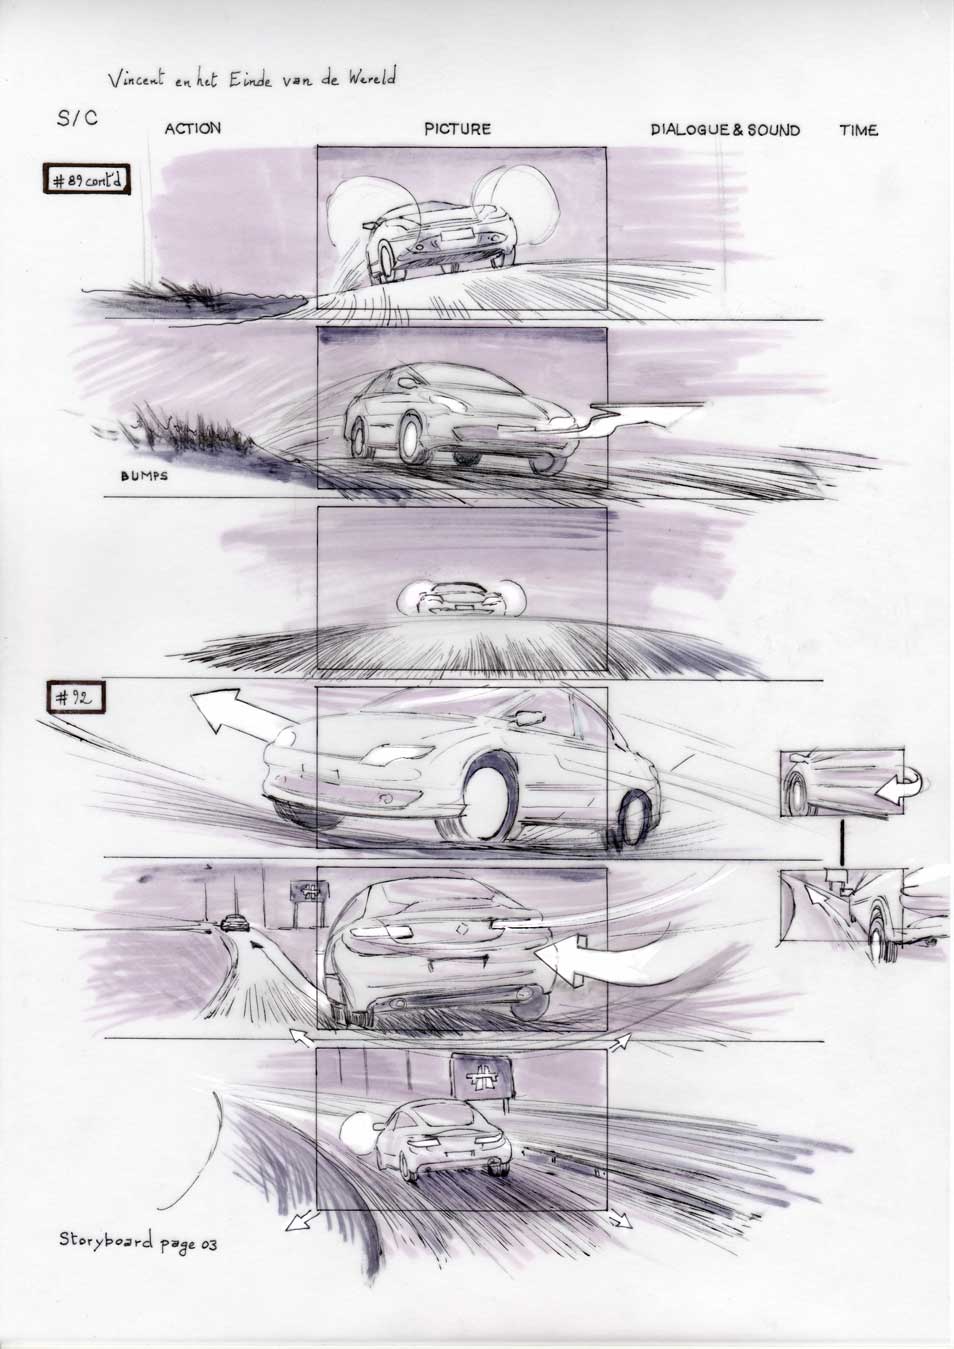 Vincent and the End of the World storyboard 03